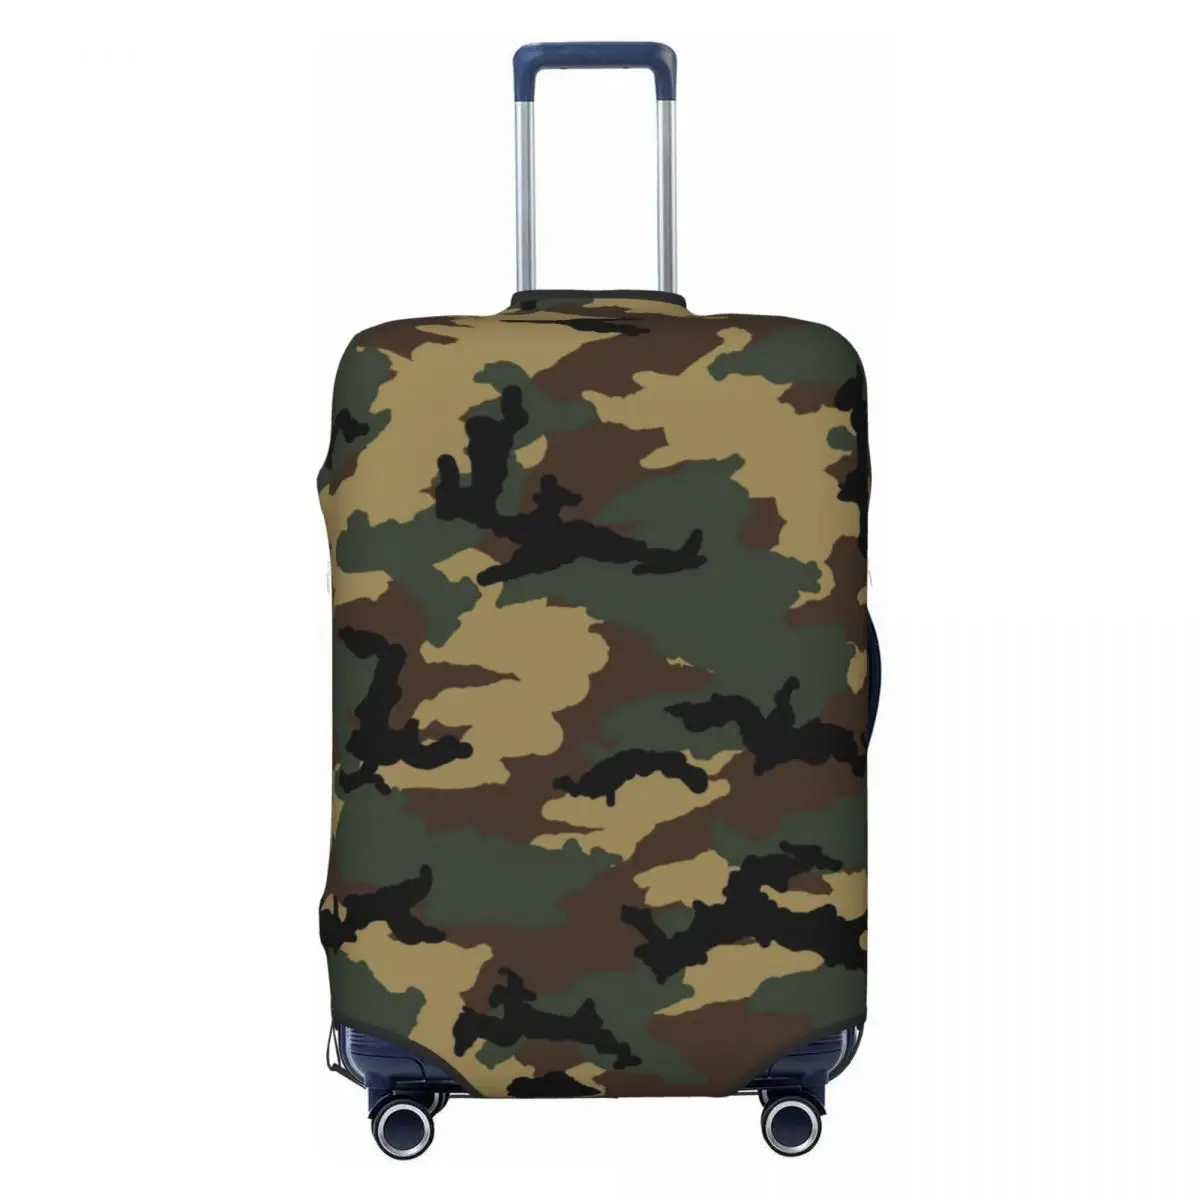 

Custom Fashion Original Woodland Camo Luggage Cover Protector Washable Military Army Camouflage Travel Suitcase Covers